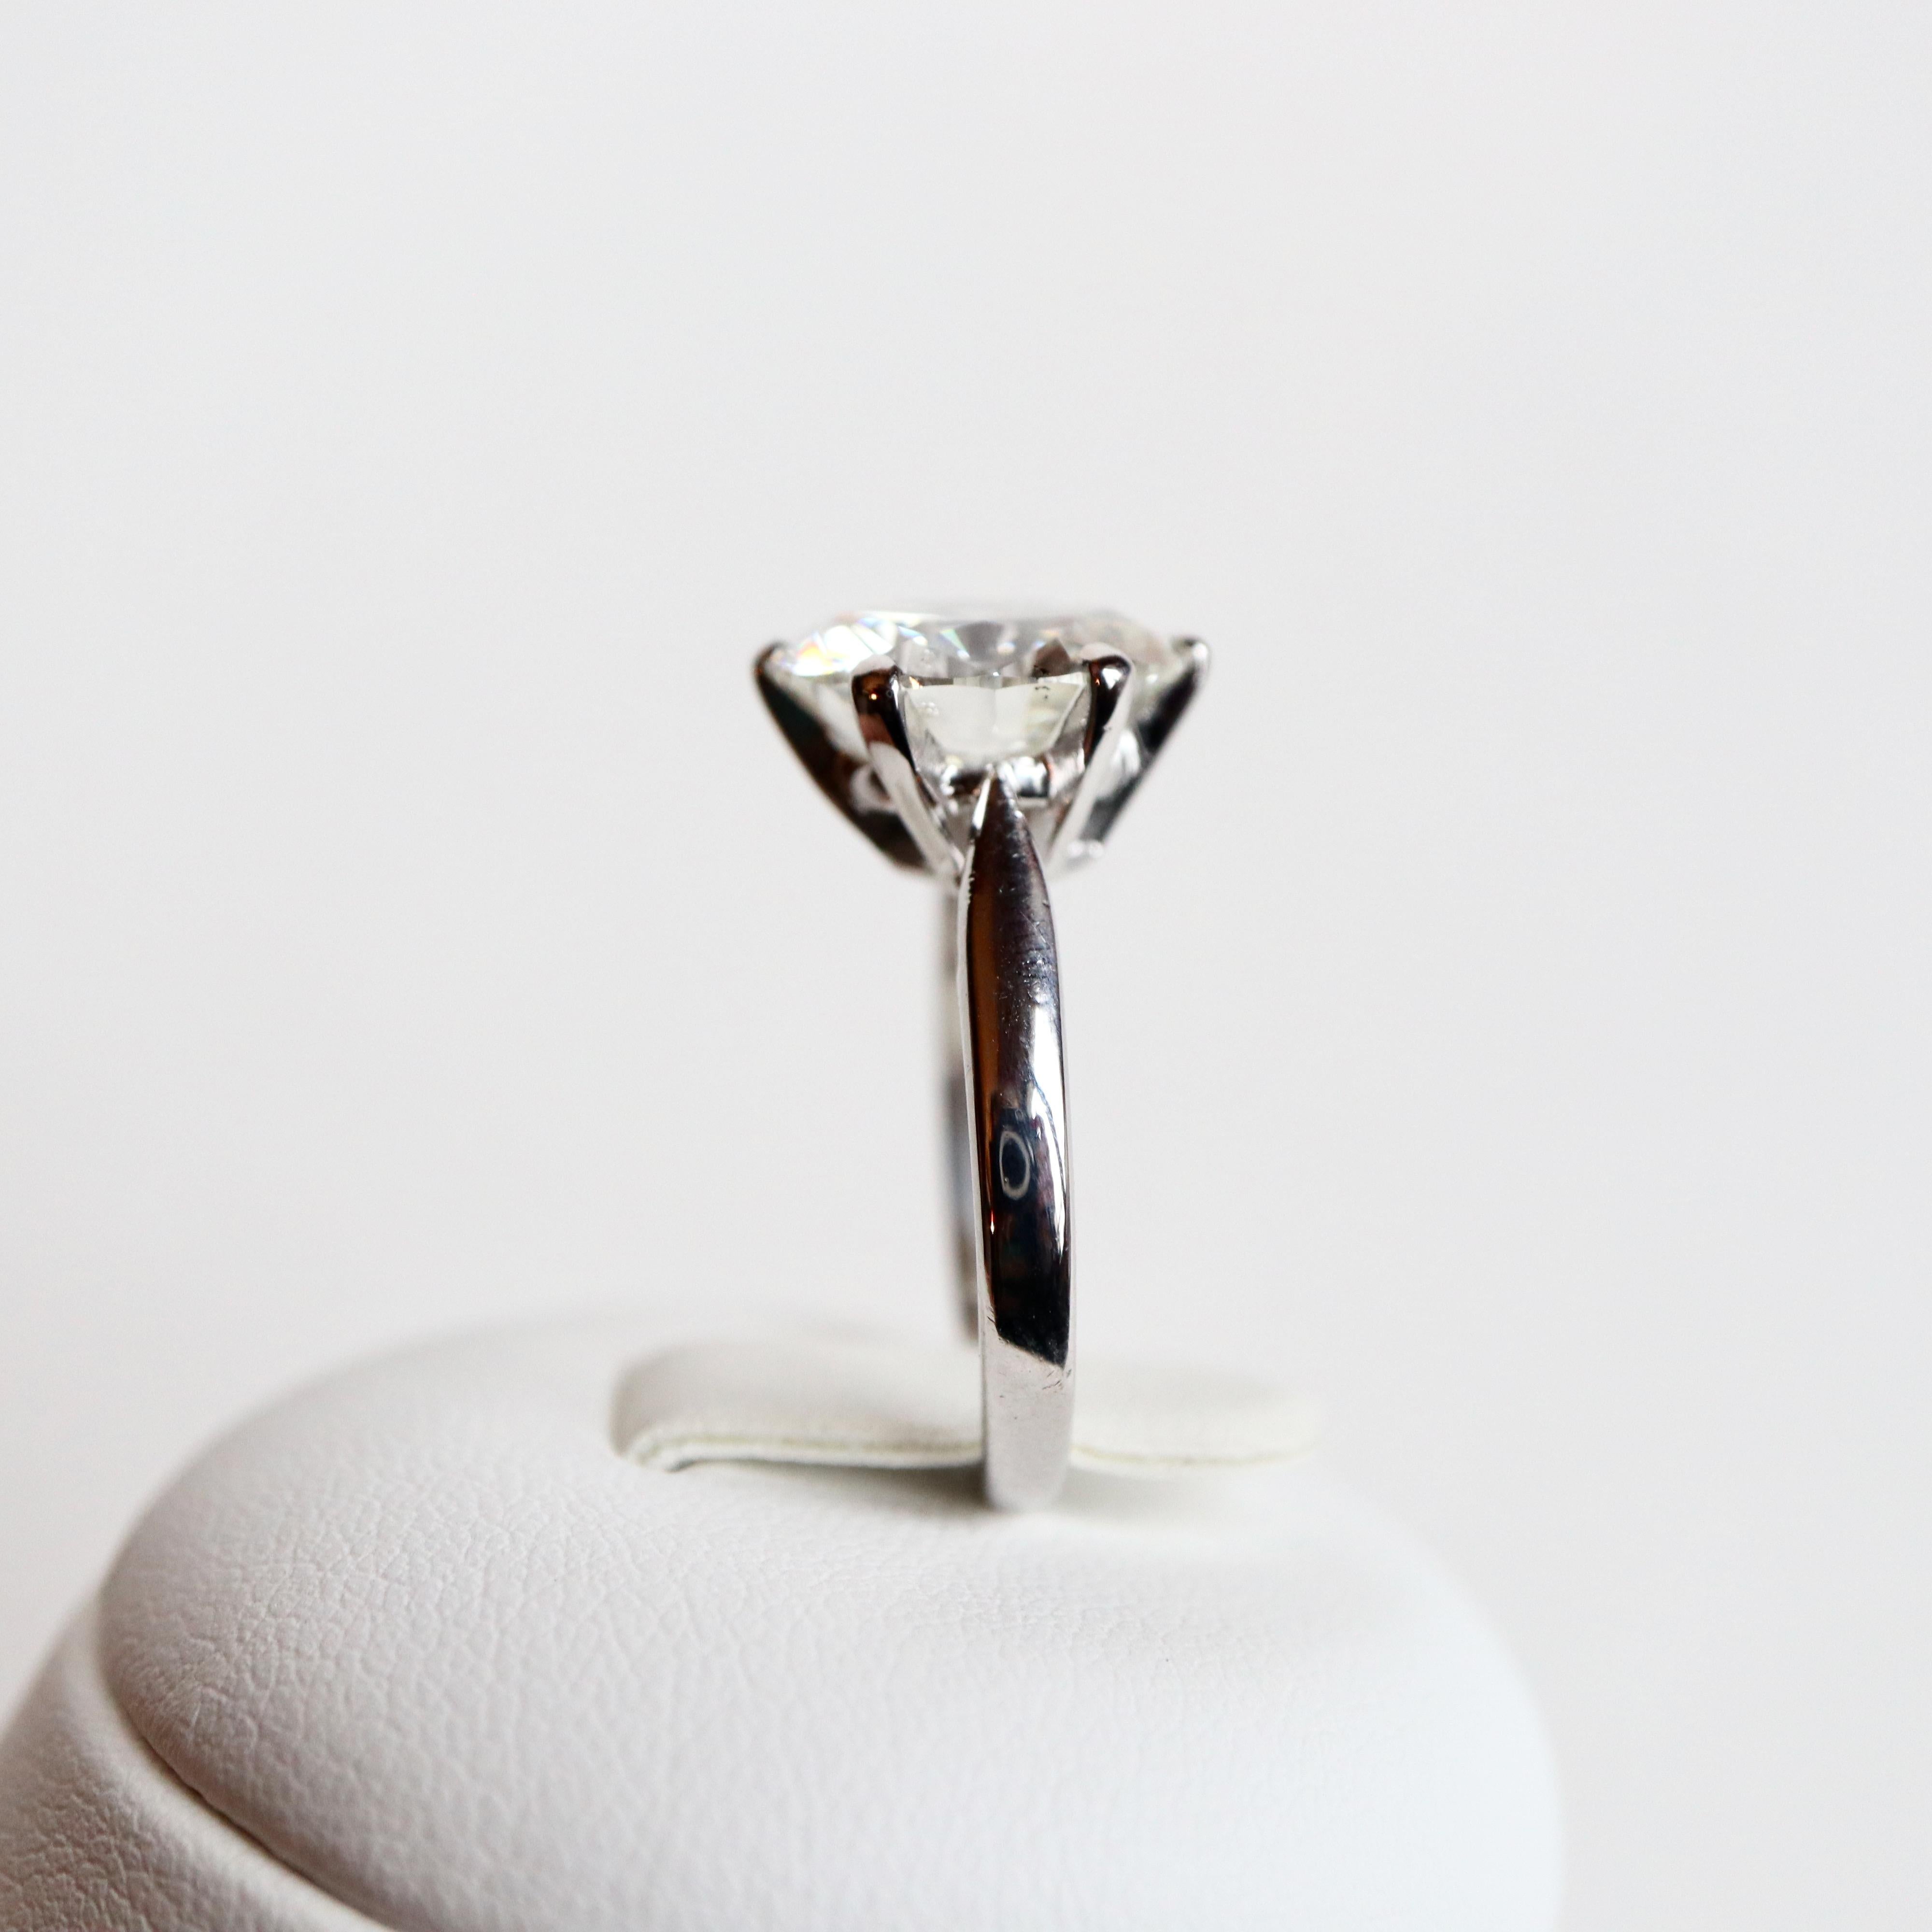 Women's Solitaire Ring with a 5.23 Carat Diamond in the Center For Sale